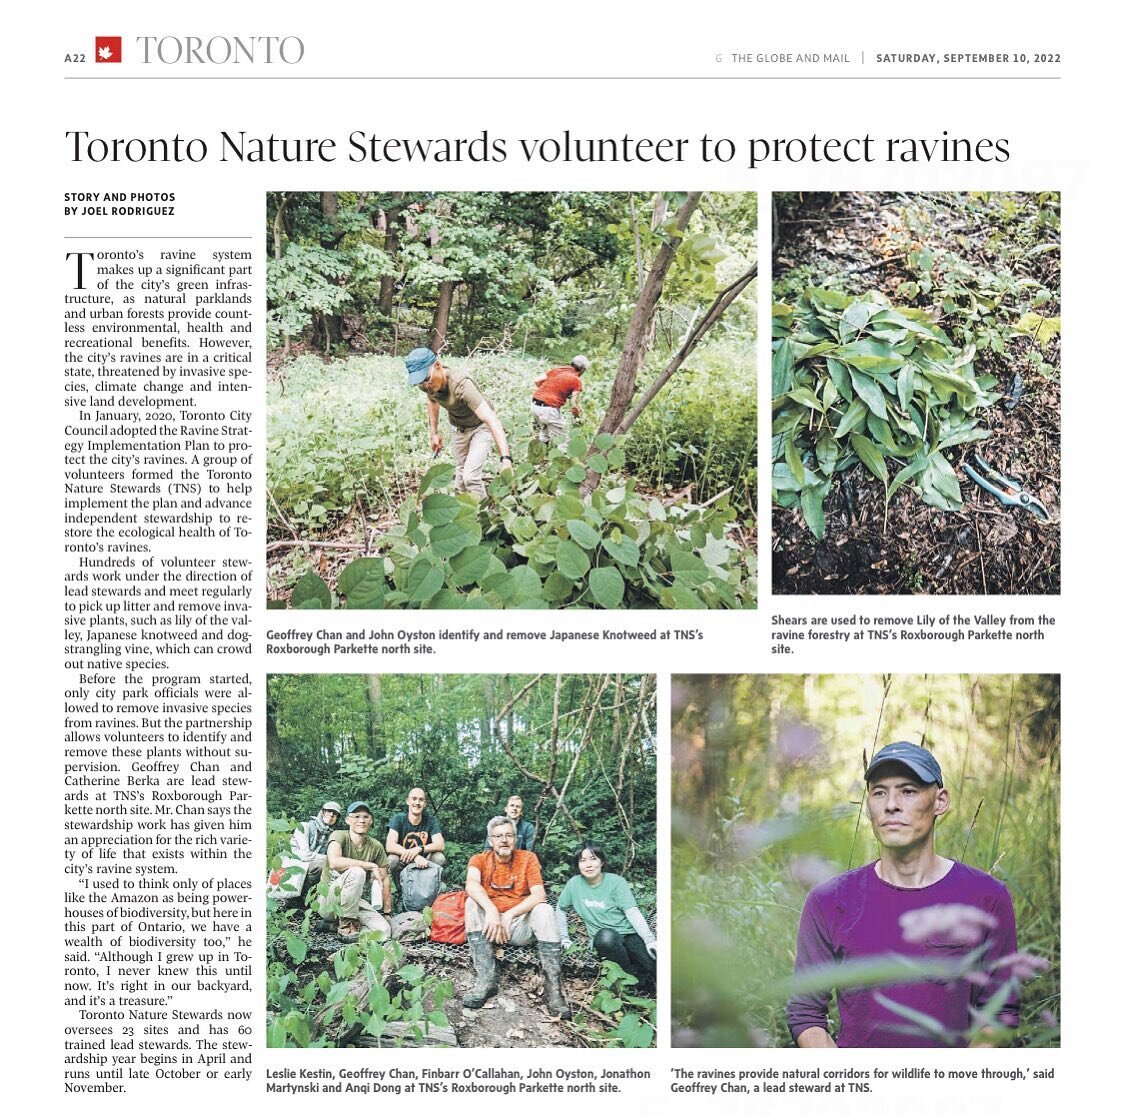 Well looks like another mentee Joel Rodriguez has some work in the @globeandmail